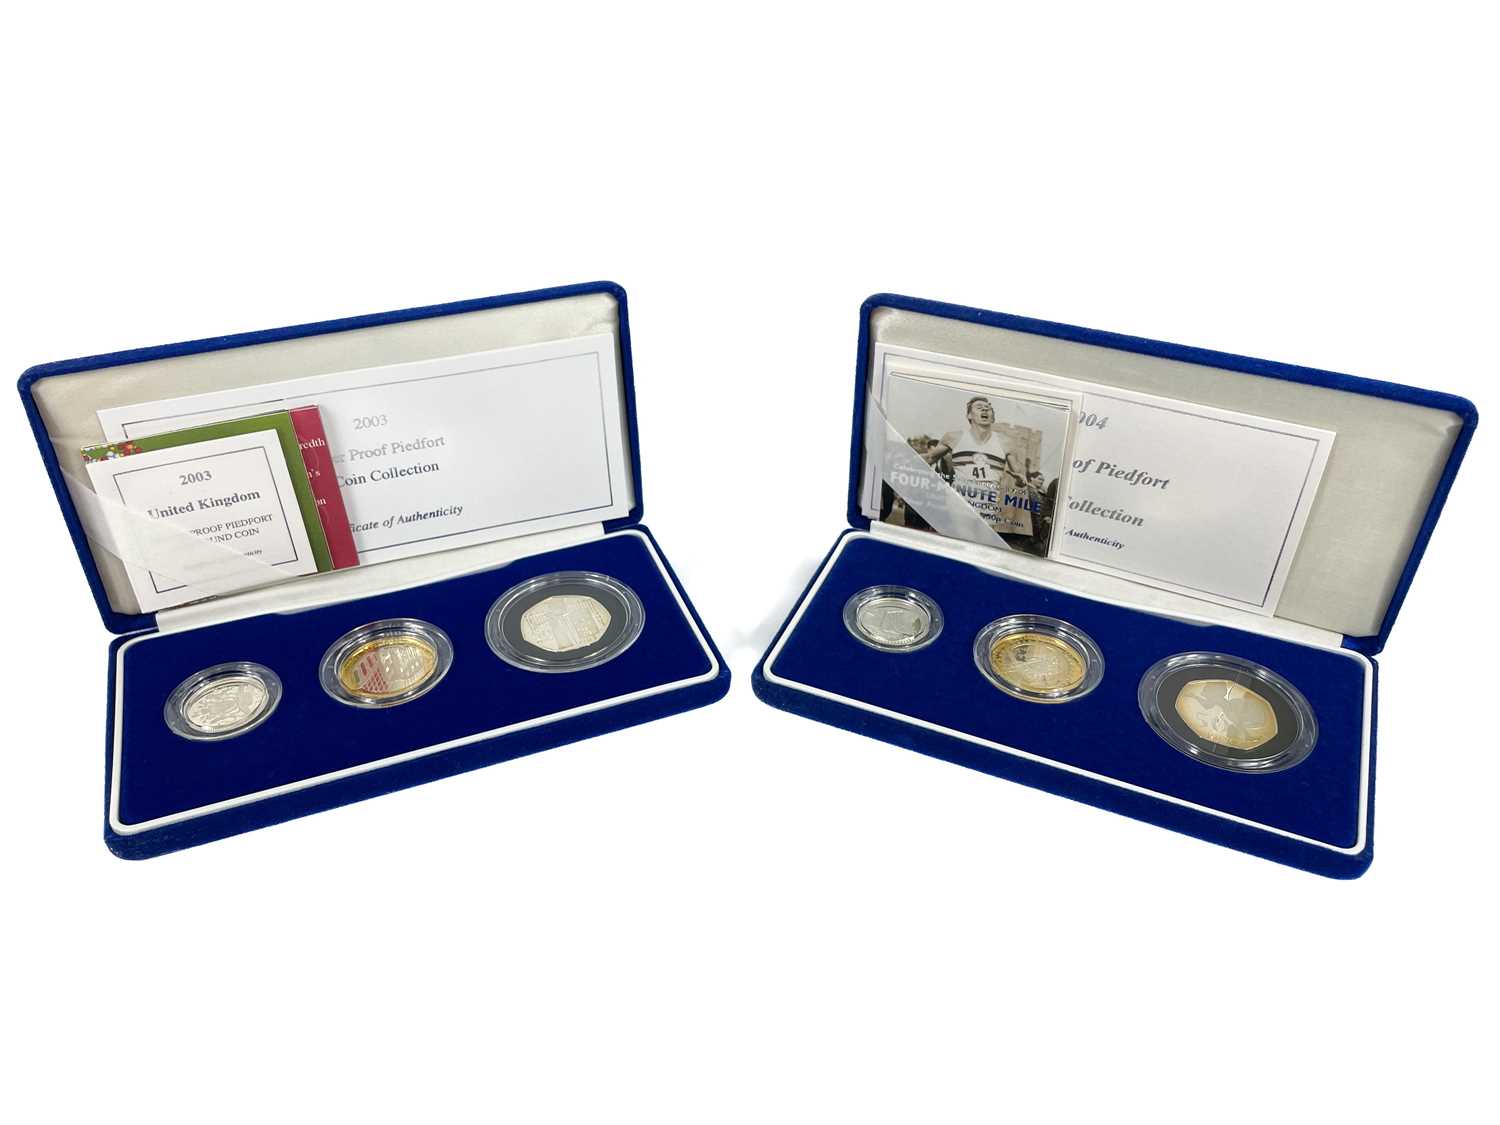 Lot 82 - Great Britain Royal Mint Silver Piedfort Proof 3 Coin Collection (x2)